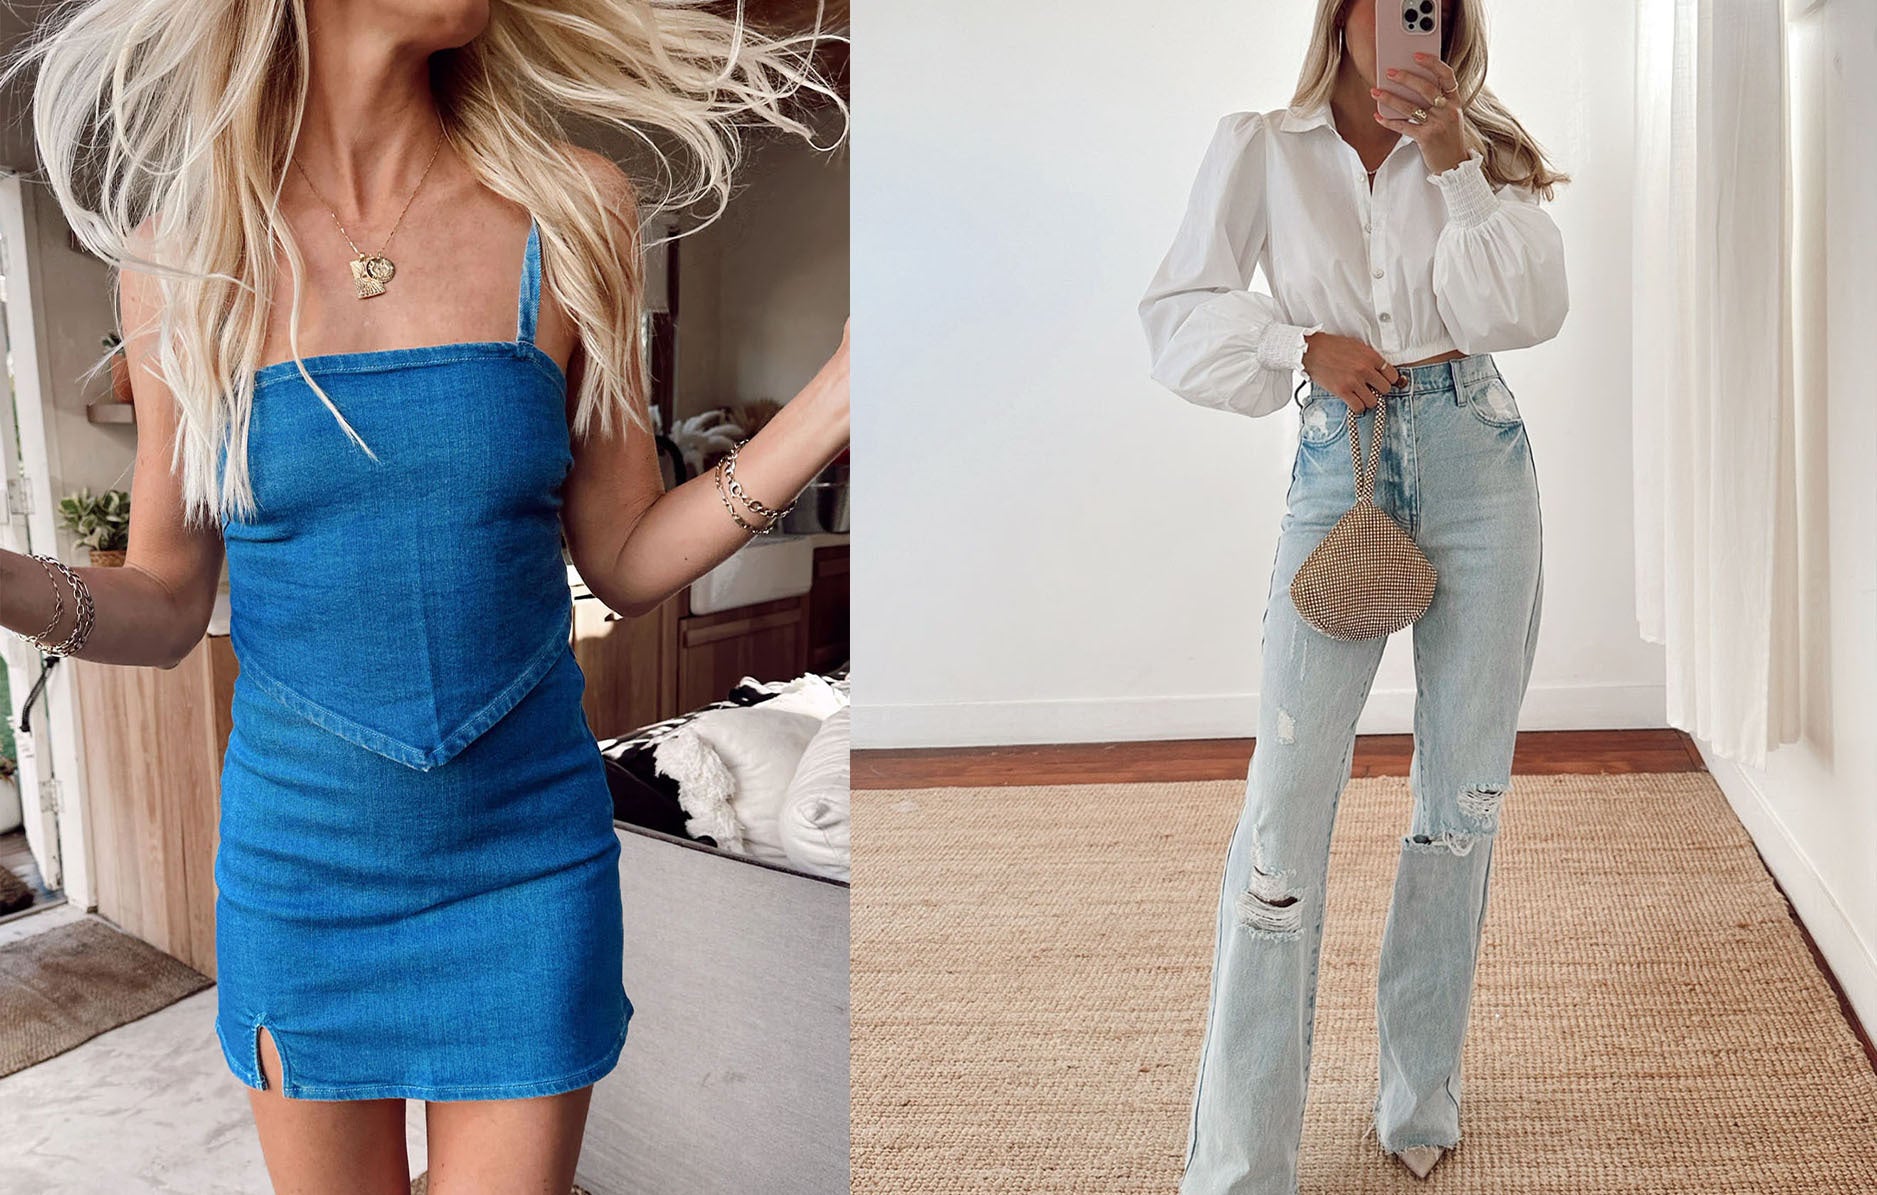 Mumu Style Guide: How to Style These 5 Types of Jeans